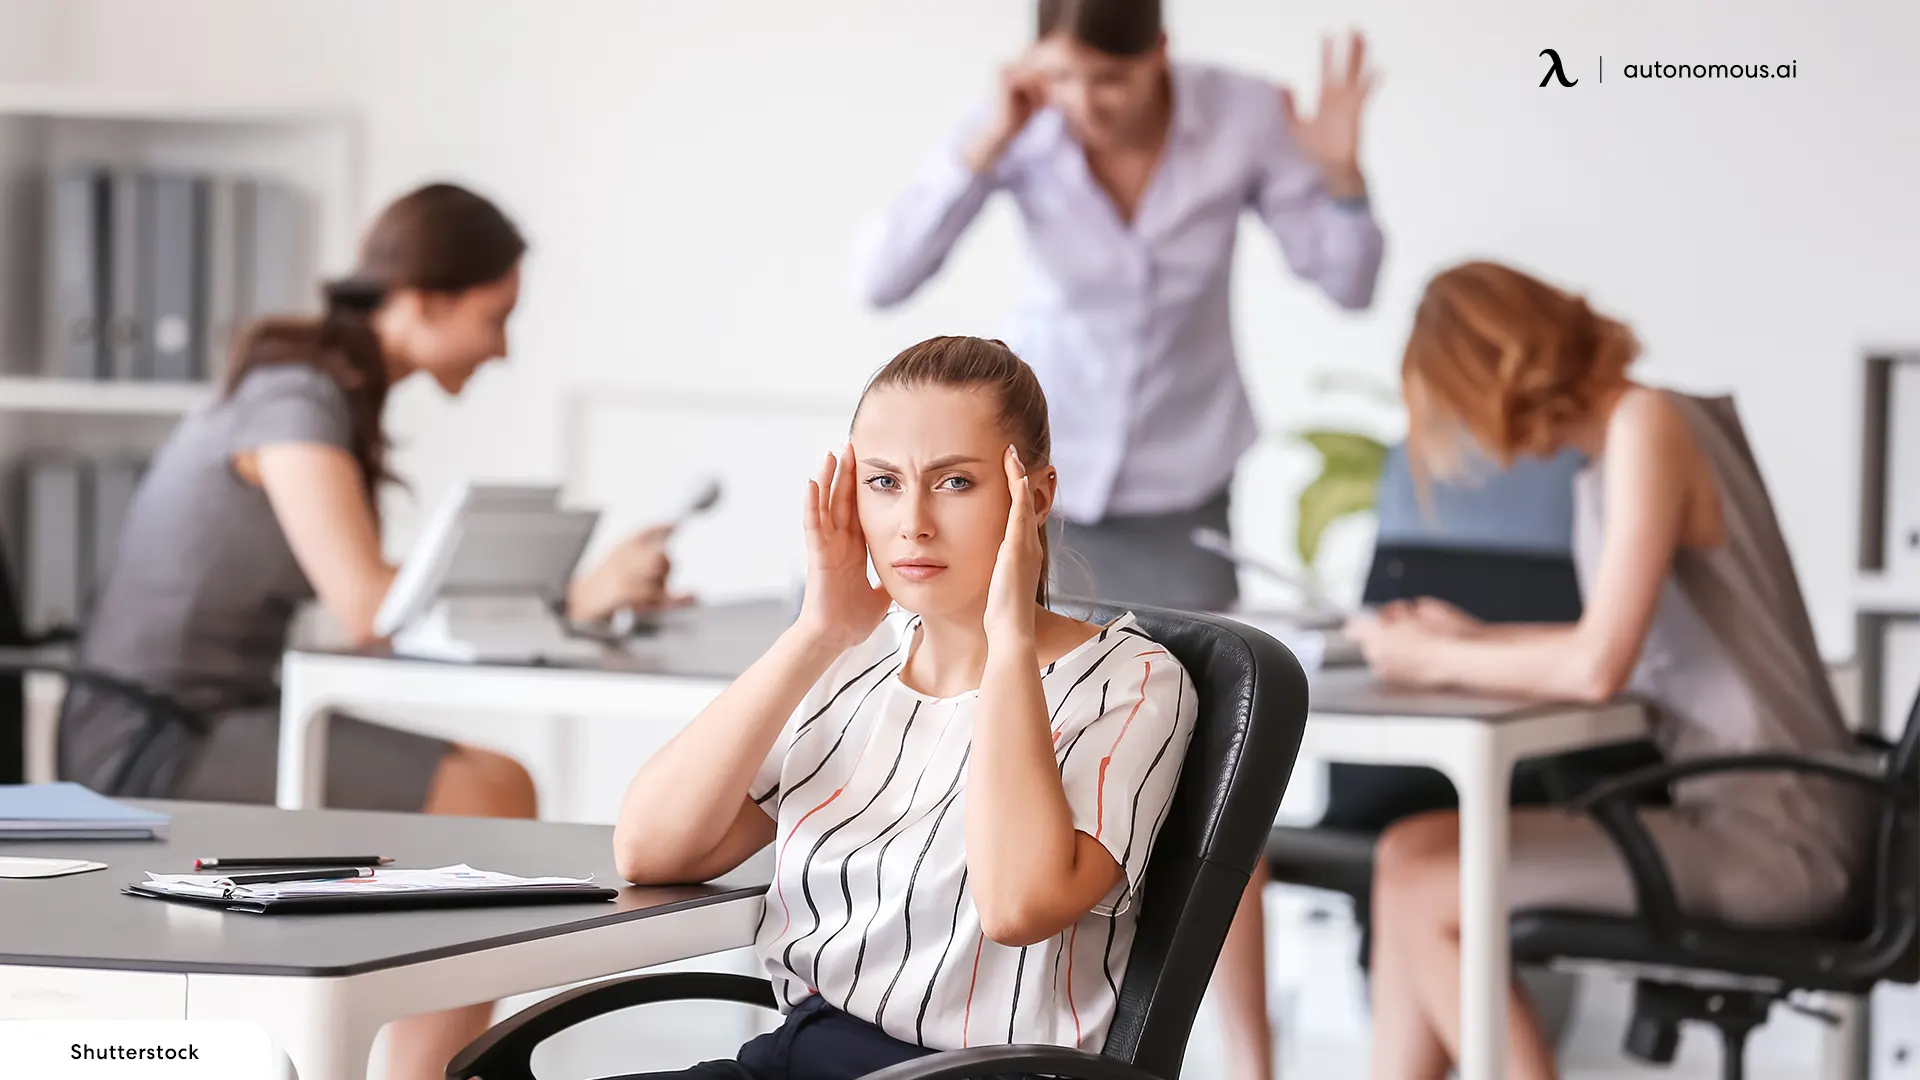 Causes of Distraction in a Noisy Office